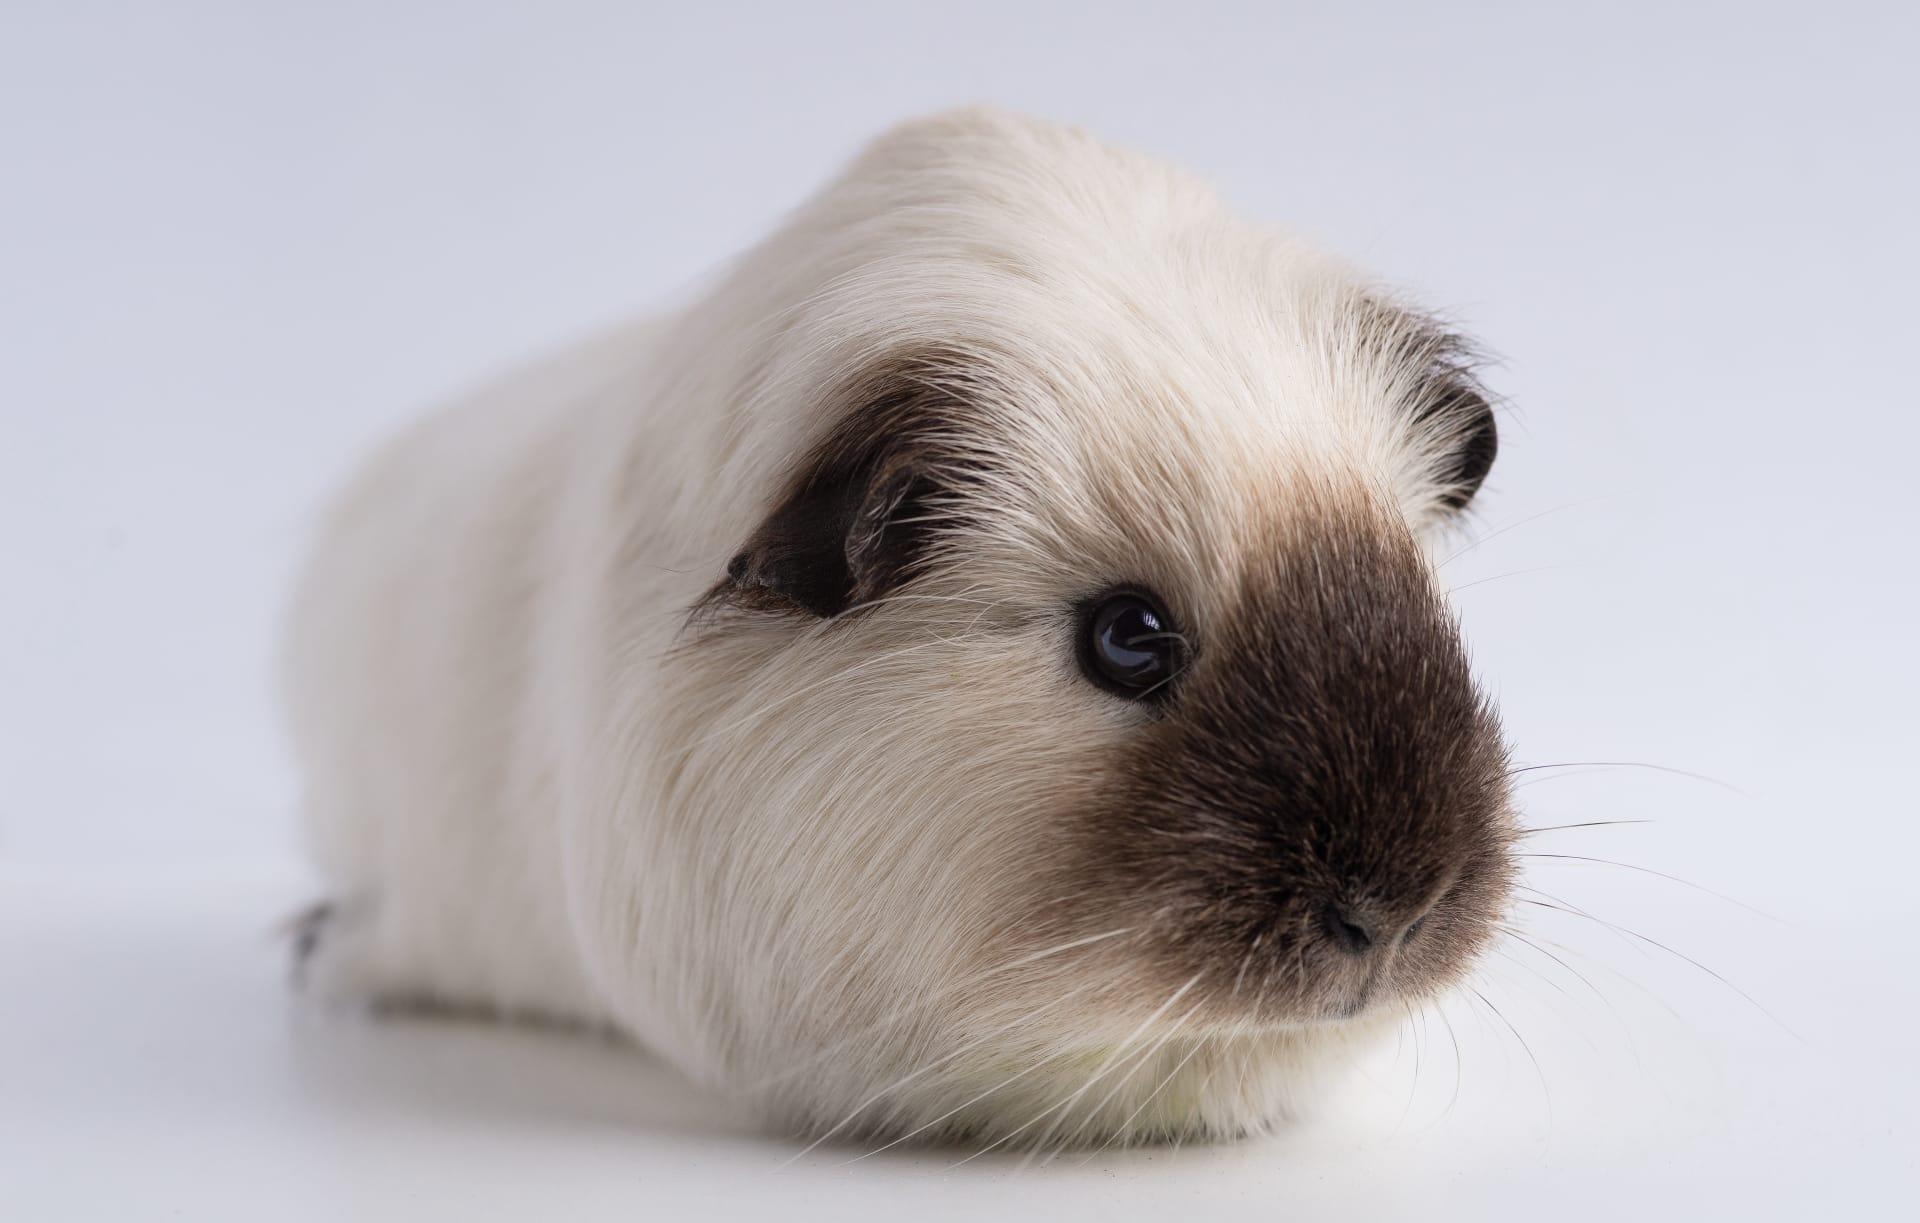 Guinea pig pictures